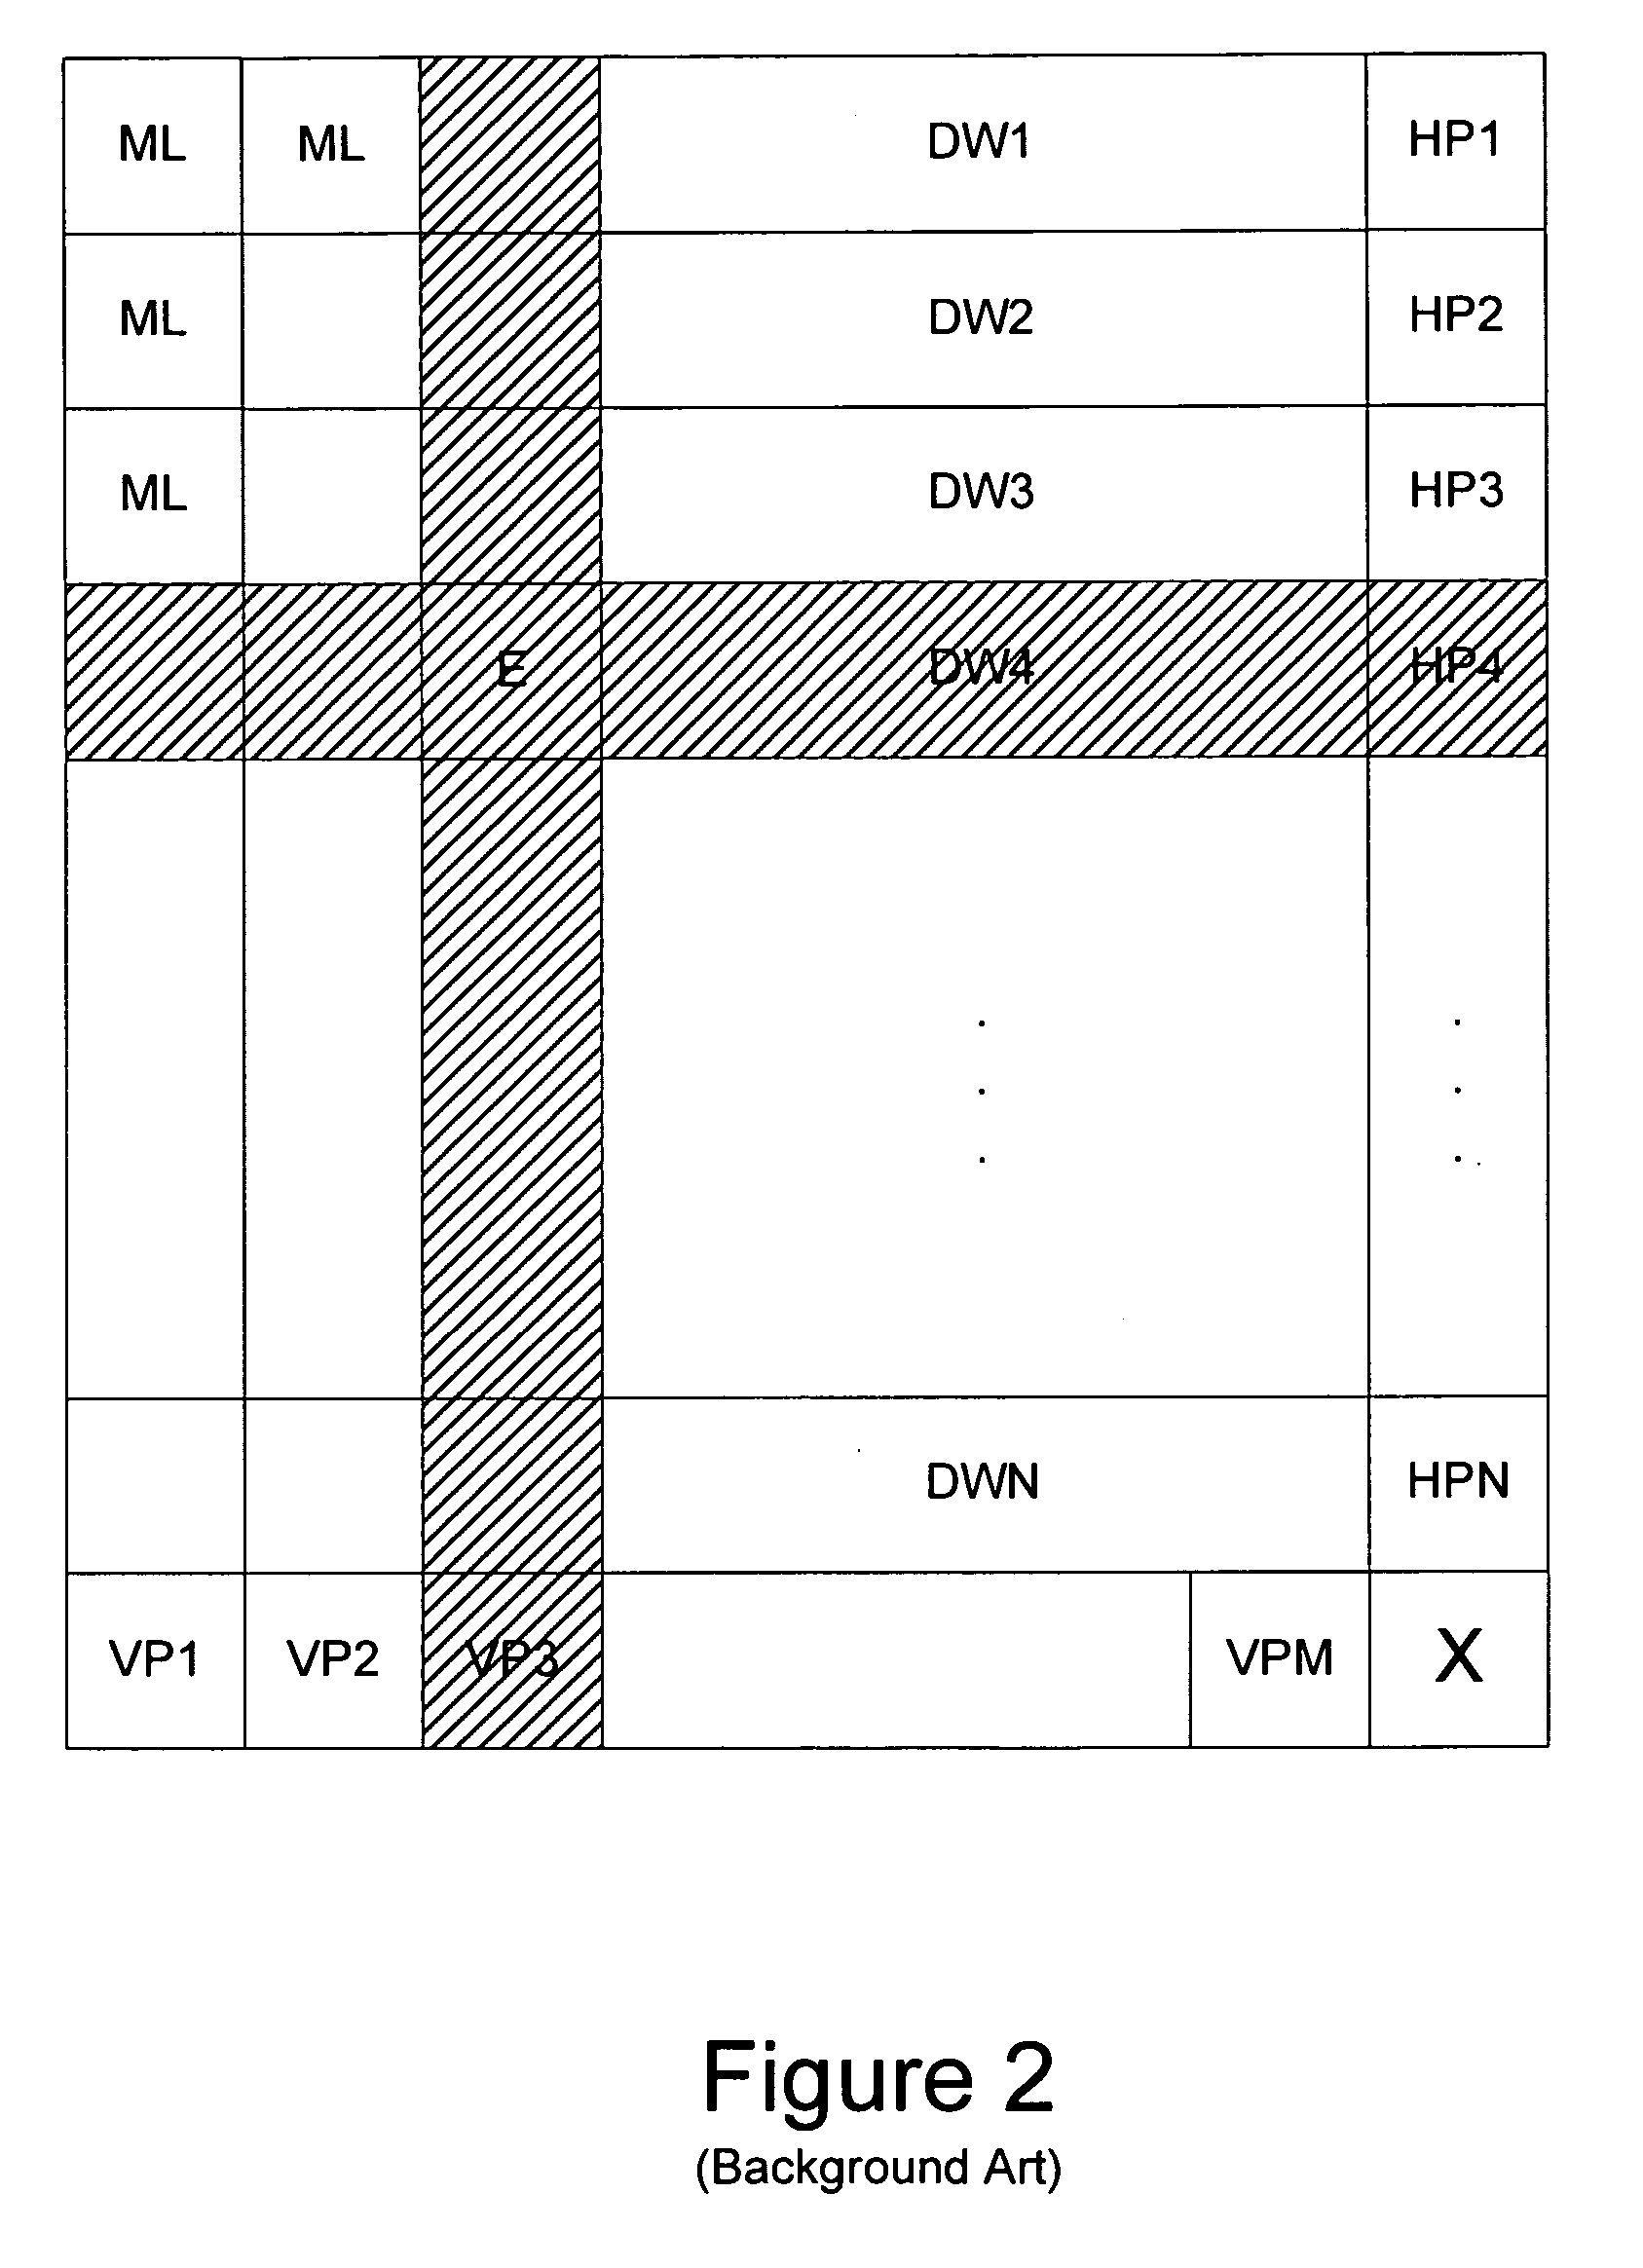 Horizontal and vertical error correction coding (ECC) system and method